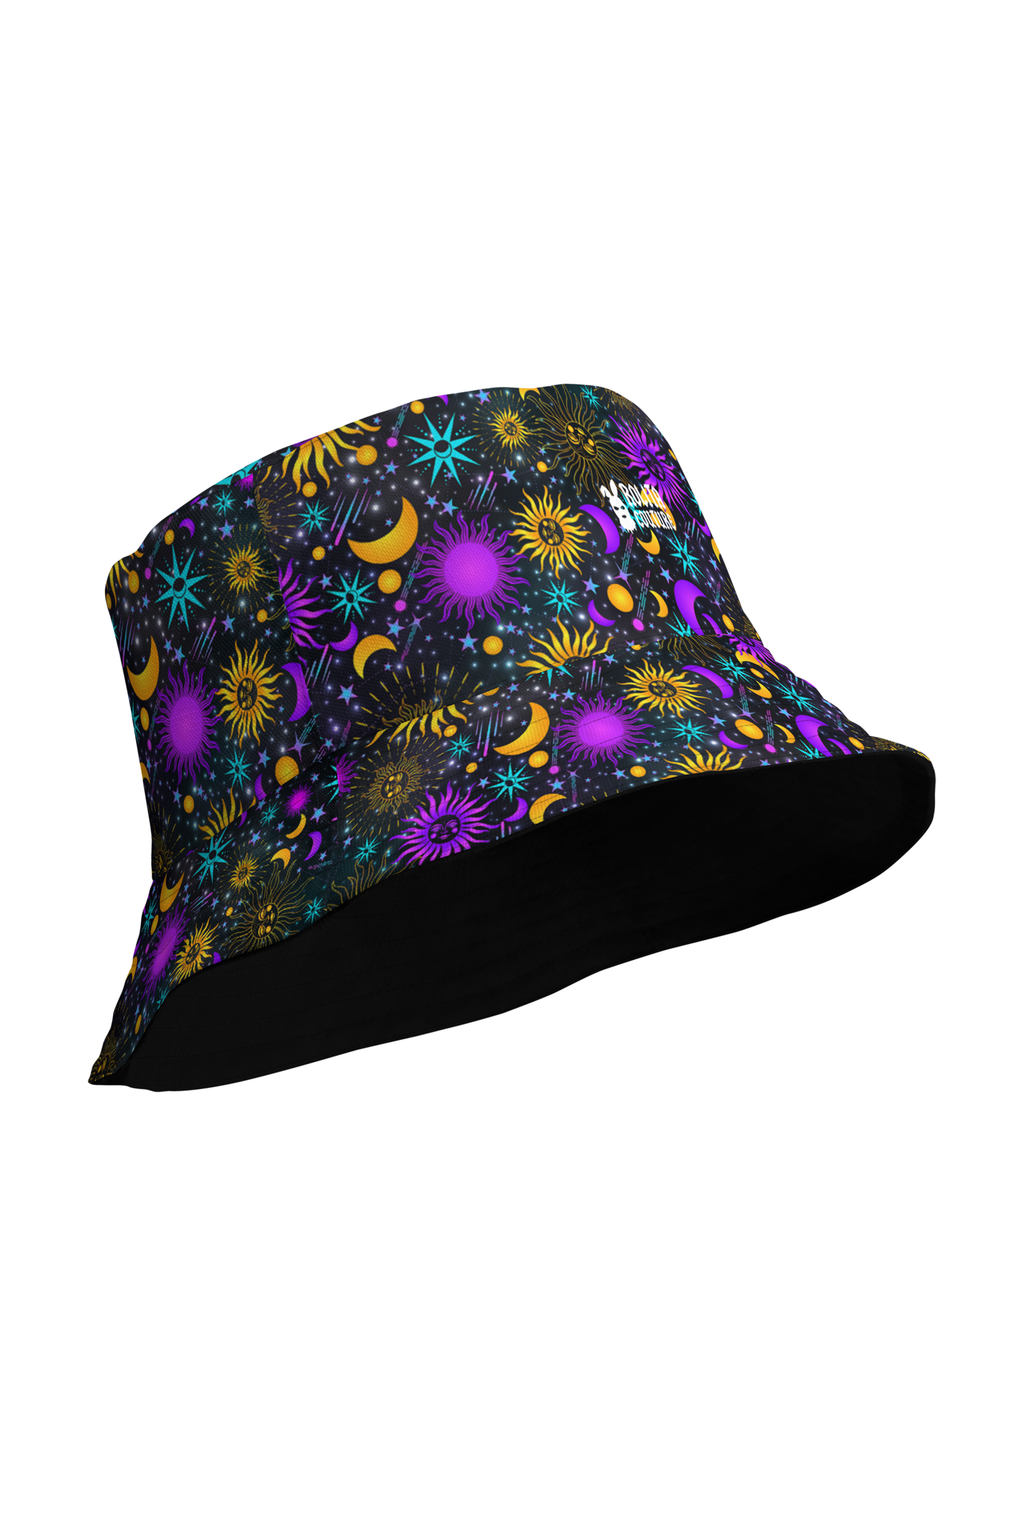 Dual Reversible Bucket Hat (Made to Order) - Celestial Soul